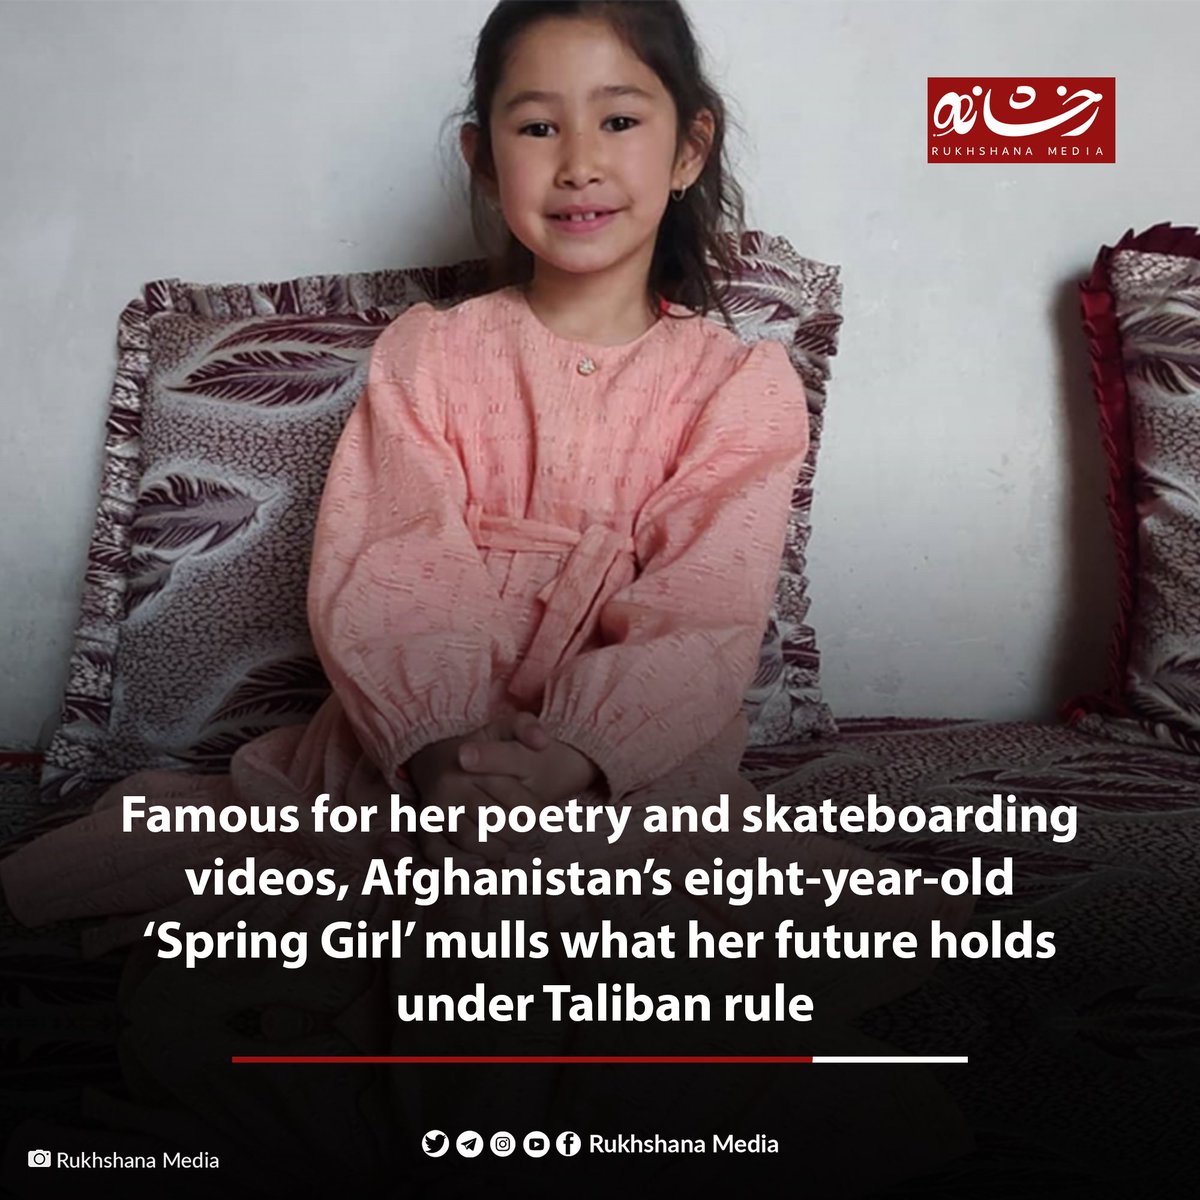 #ICYMI “I had to have skate shoes for practice. [My parents] couldn’t buy me shoes, so I wore the neighbor kid’s shoes, which were much bigger than my feet,” Fatima says. Read more: rukhshana.com/en/famous-for-…